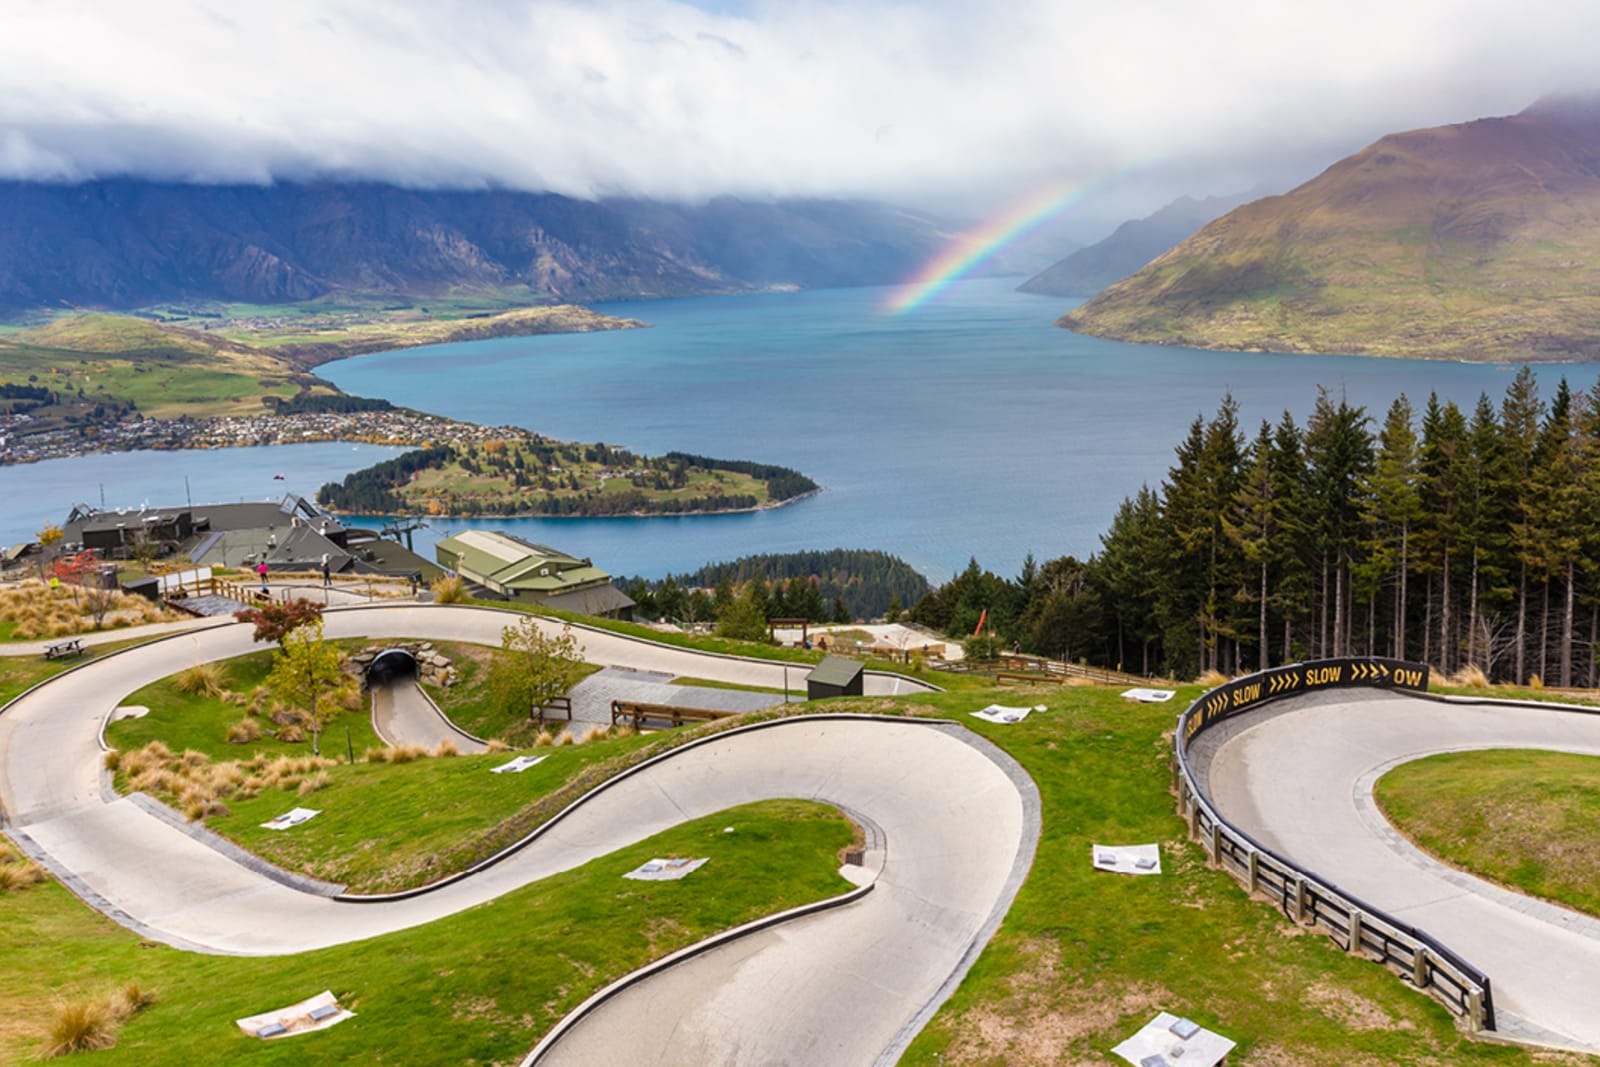 The Queenstown luge track is a great spot for families